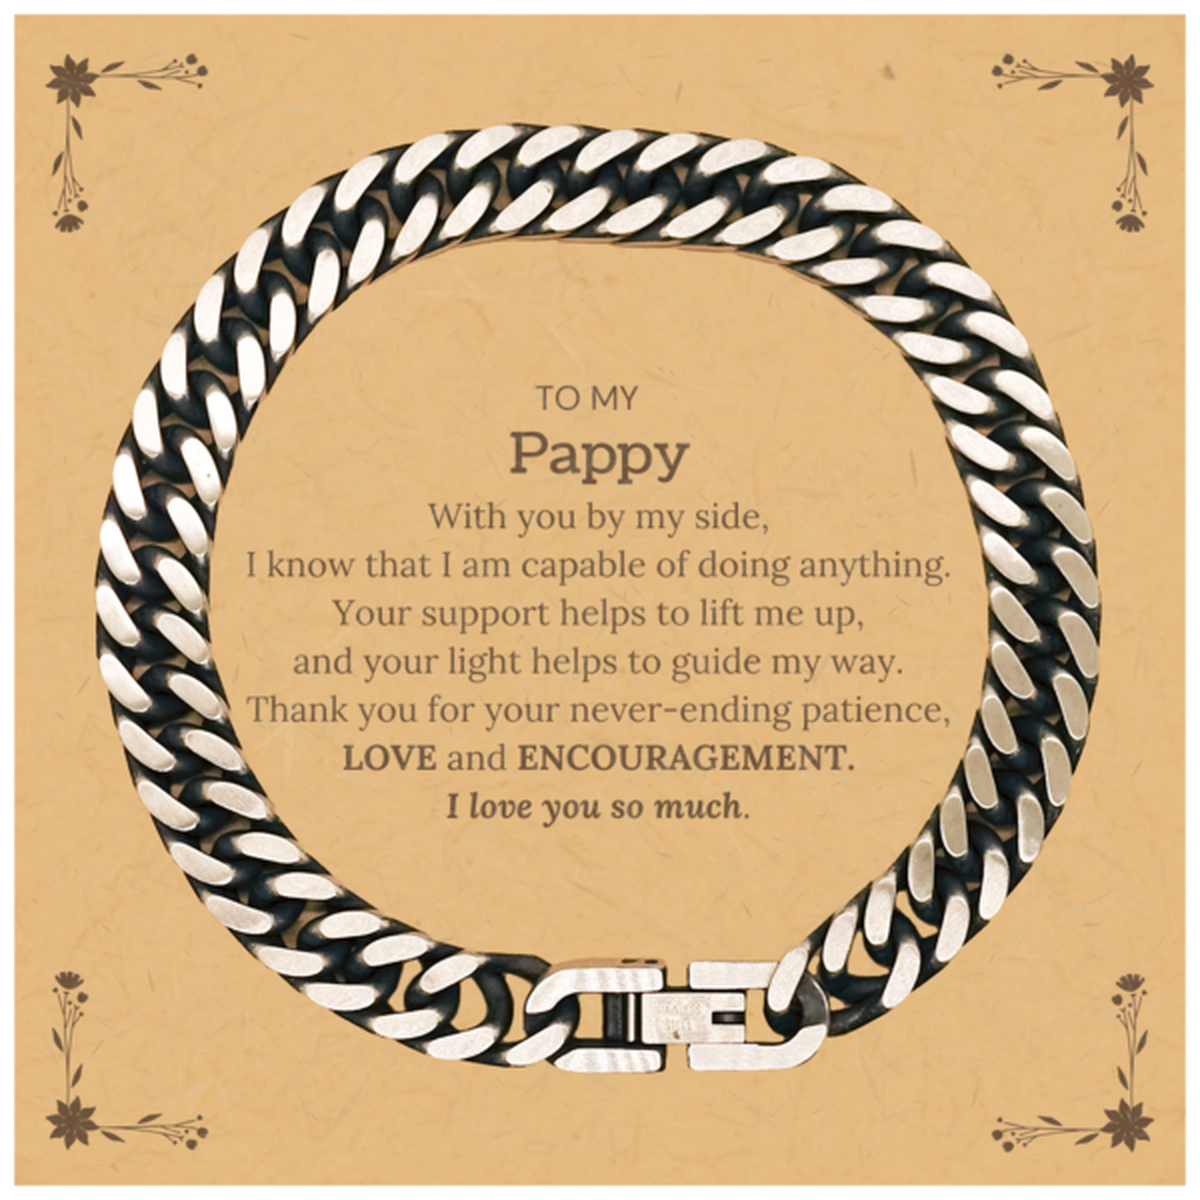 Appreciation Pappy Cuban Link Chain Bracelet Gifts, To My Pappy Birthday Christmas Wedding Keepsake Gifts for Pappy With you by my side, I know that I am capable of doing anything. I love you so much